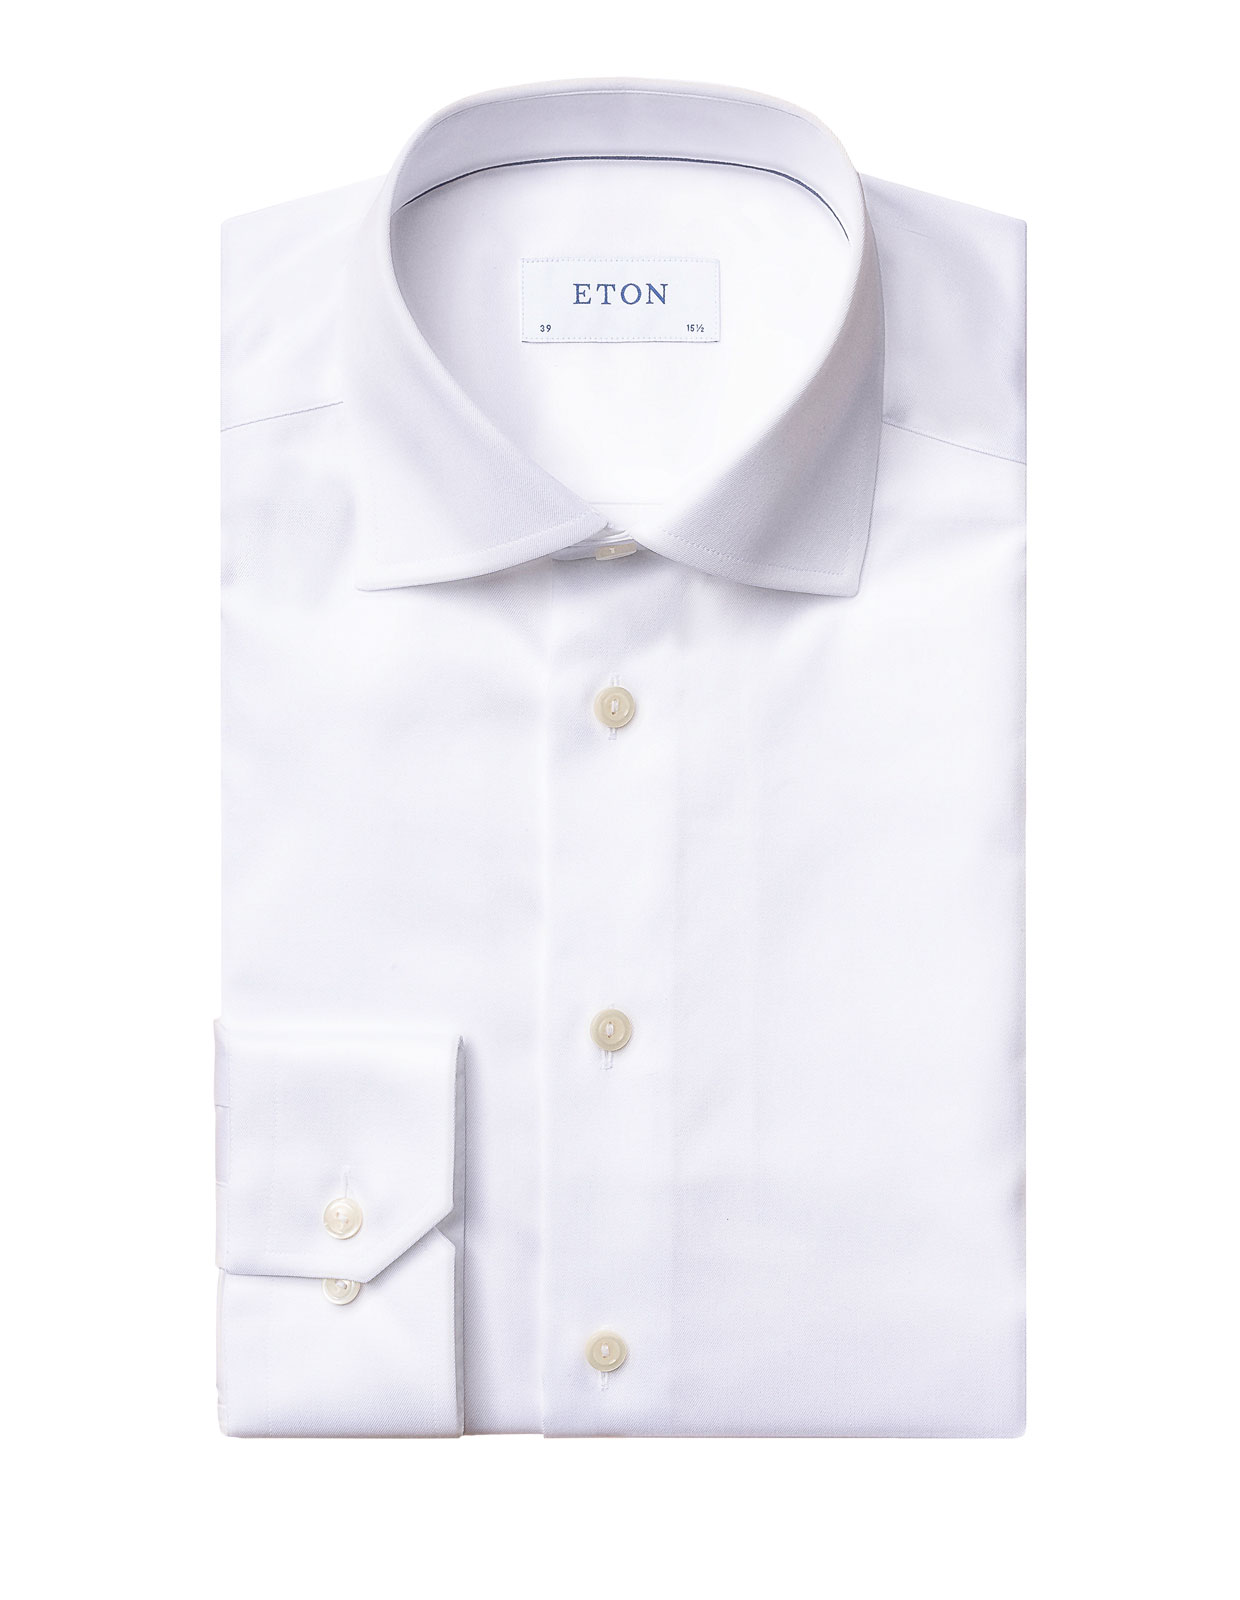 Contemporary Fit Signature Twill Shirt White